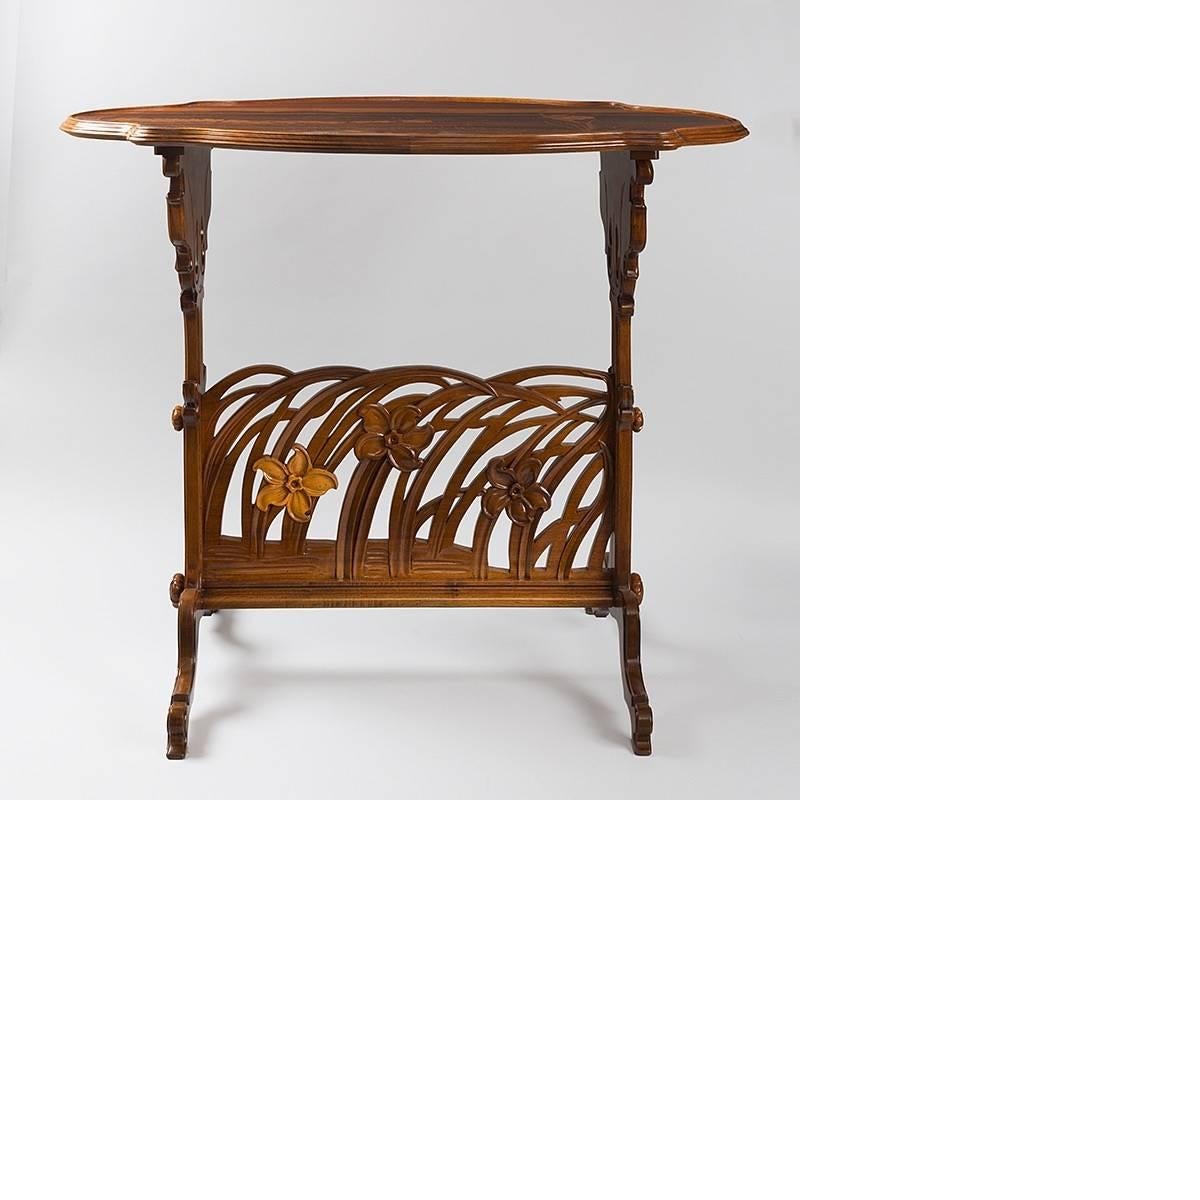 A French Art Nouveau carved walnut and fruitwood marquetry 